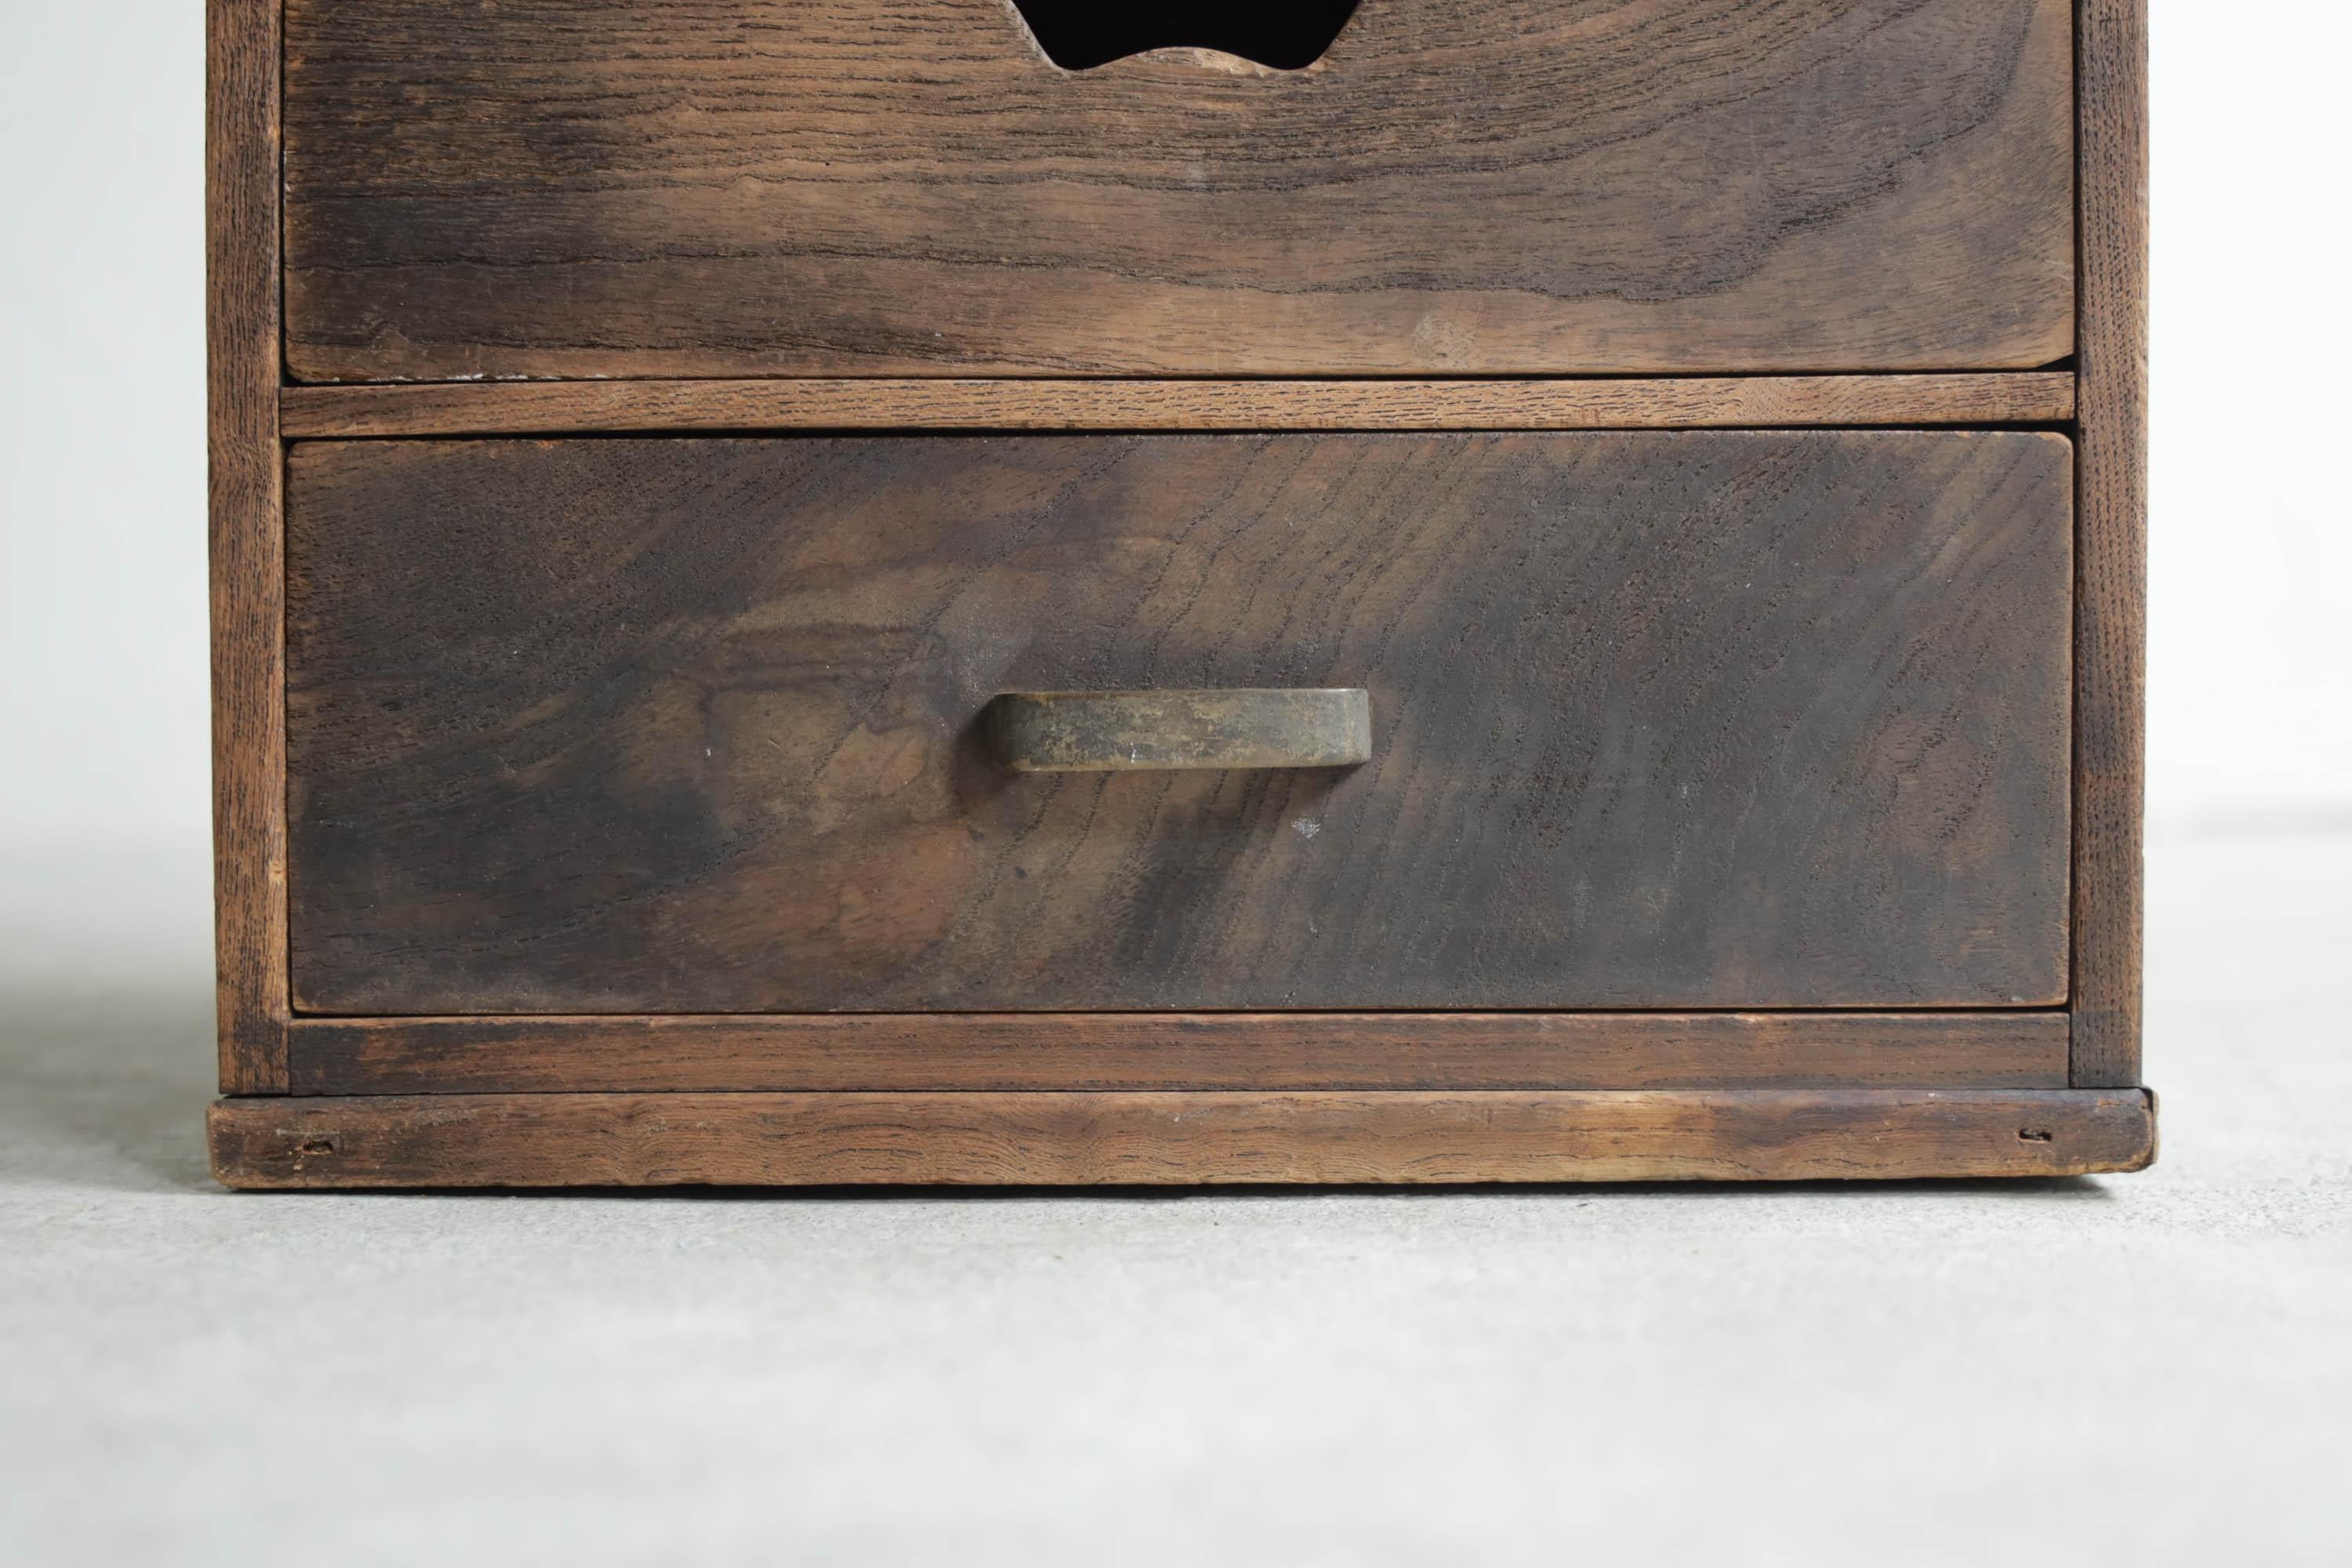 Japanese Antique Double Pull-Out Drawers 1860s-1900s /Tansu, Wabi-Sabi In Good Condition In Katori-Shi, 12